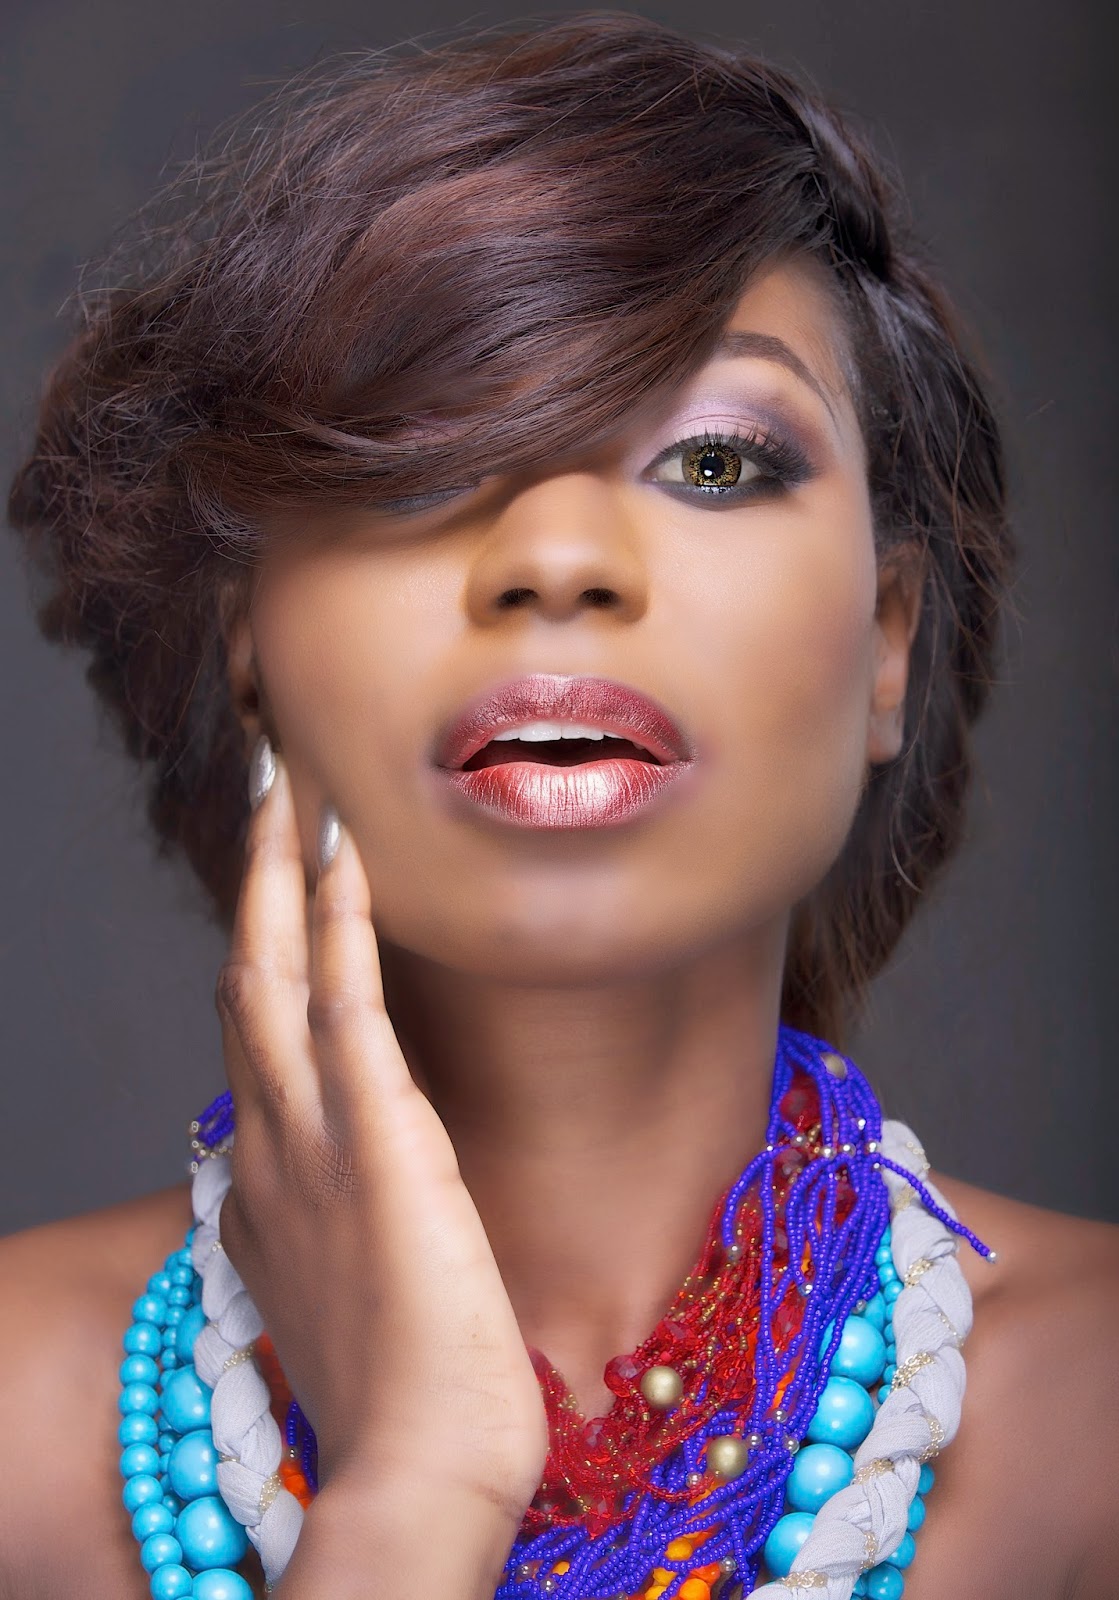 BloTV: Banky W's artist and E.M.E's First Lady Niyola chats with BloTV